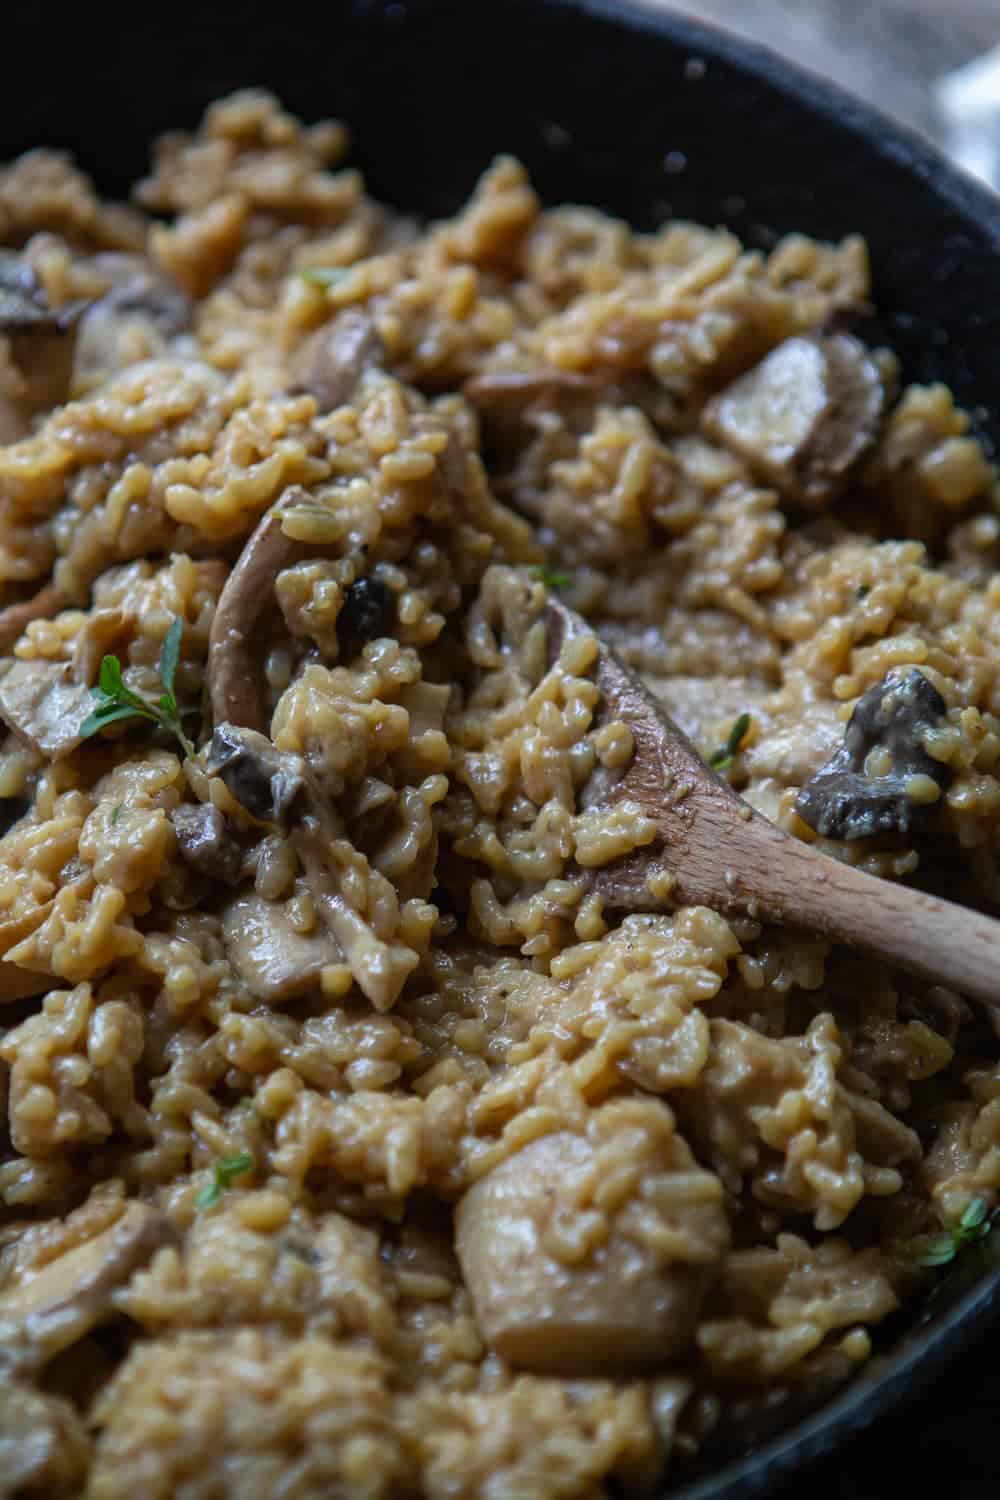 Mushroom risotto being cooked in a pan